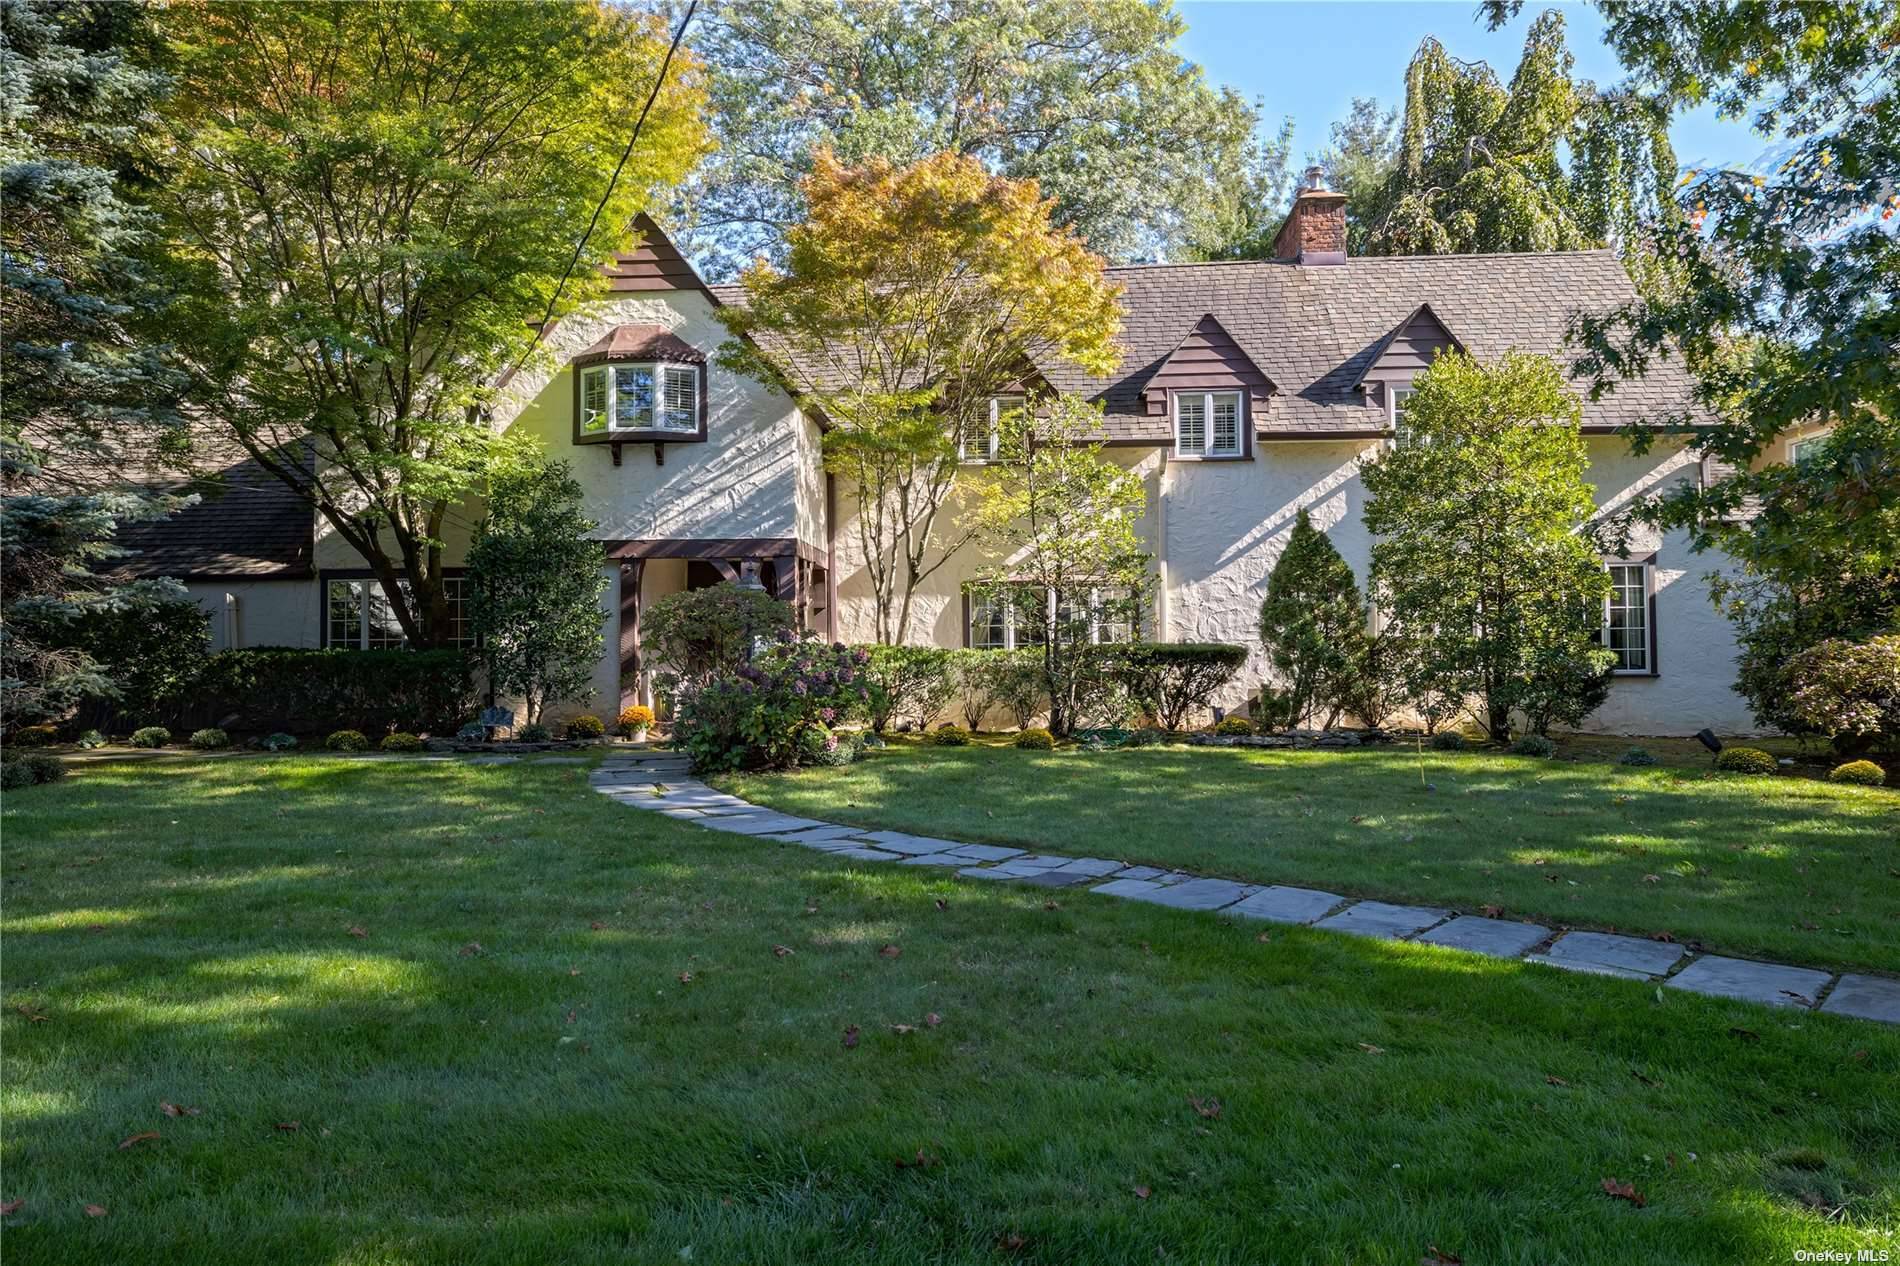 Prepare to be wowed ! This exquisite Tudor is one of the most fabulous homes in Rockville Centre with incredible attention to detail and meticulous workmanship throughout.